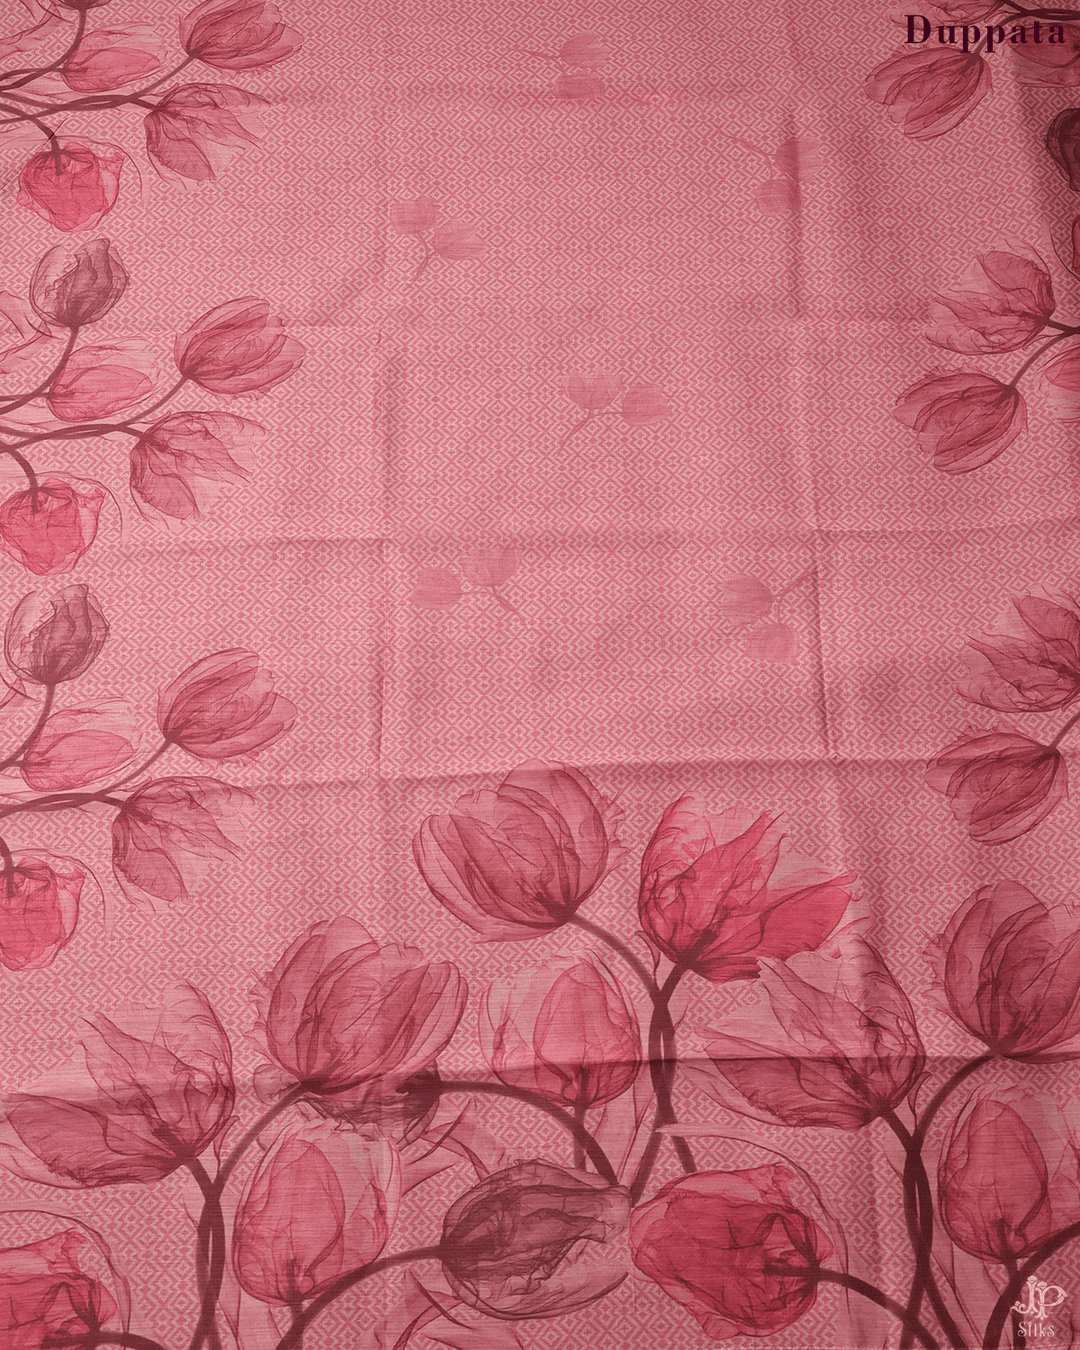 Onion Pink Unstitched Chudidhar Material - D5276 - View 3